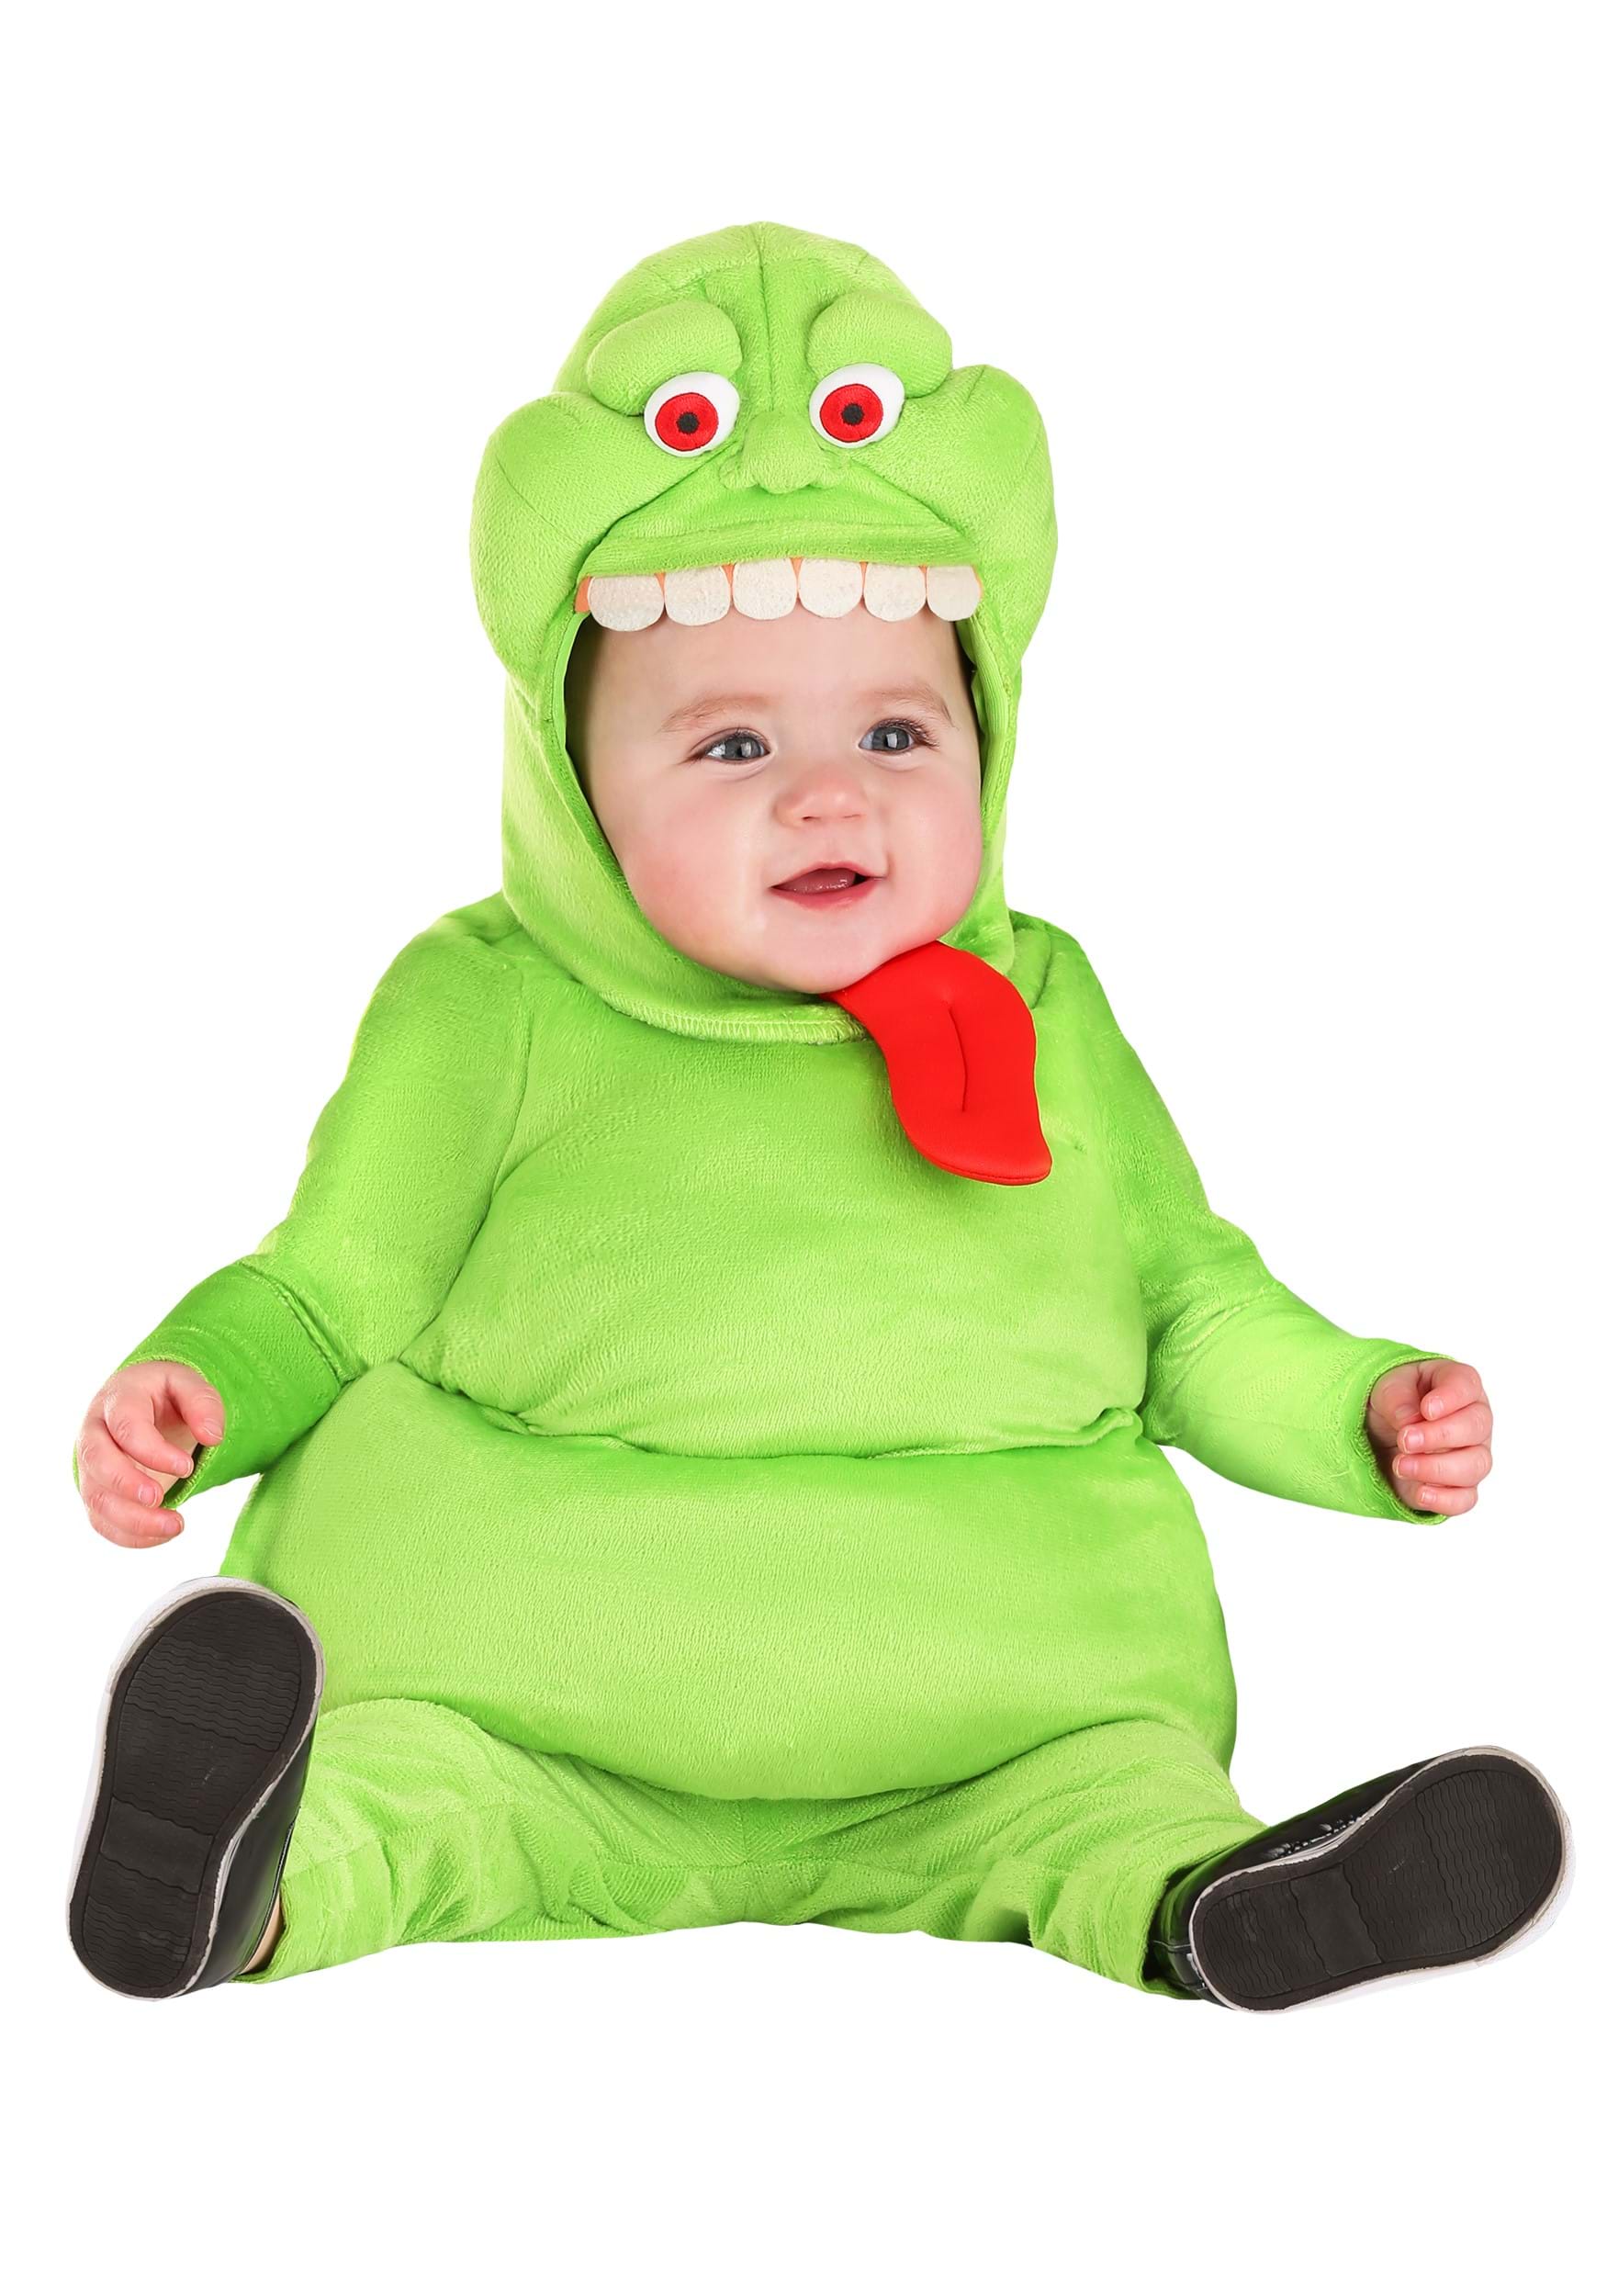 Photos - Fancy Dress Ghostbusters FUN Costumes Infant  Slimer Costume Green/Red 